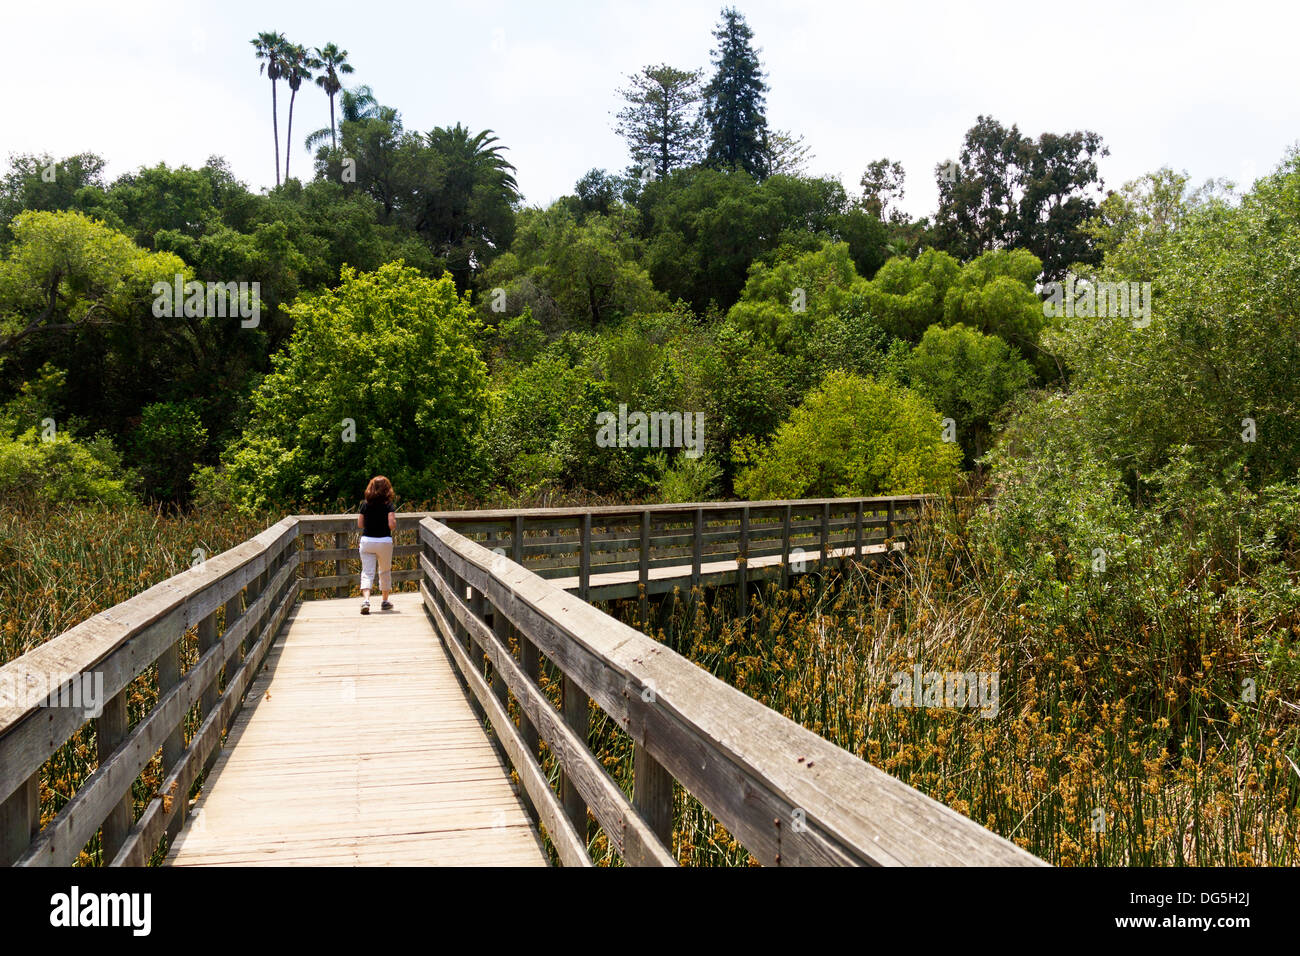 Woman seen from behind walking on a wooden footbridge across a marsh with lush greenery in the background. Stock Photo